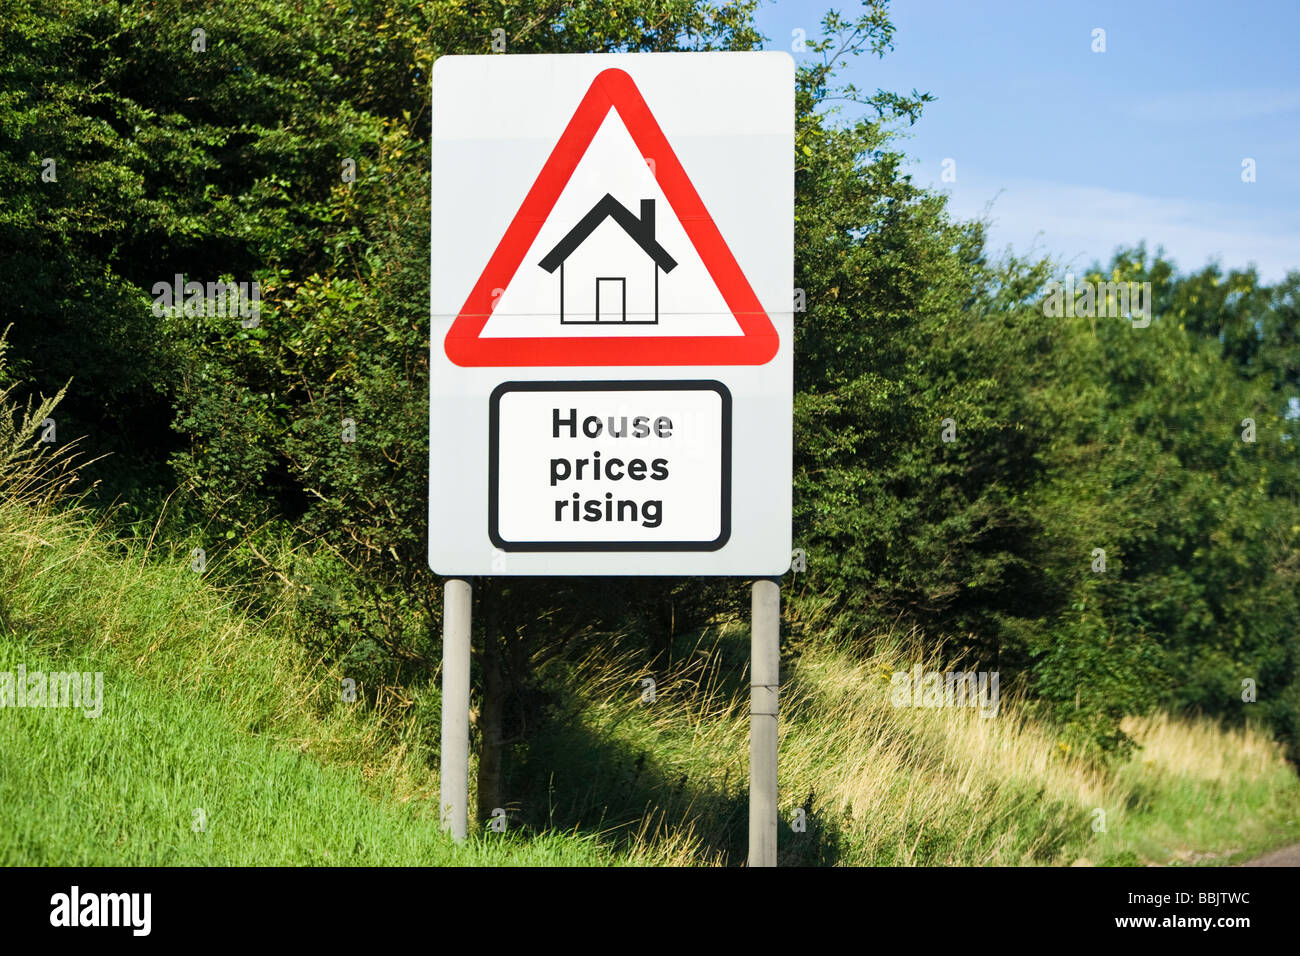 Concept sign showing House prices rising, England UK Stock Photo